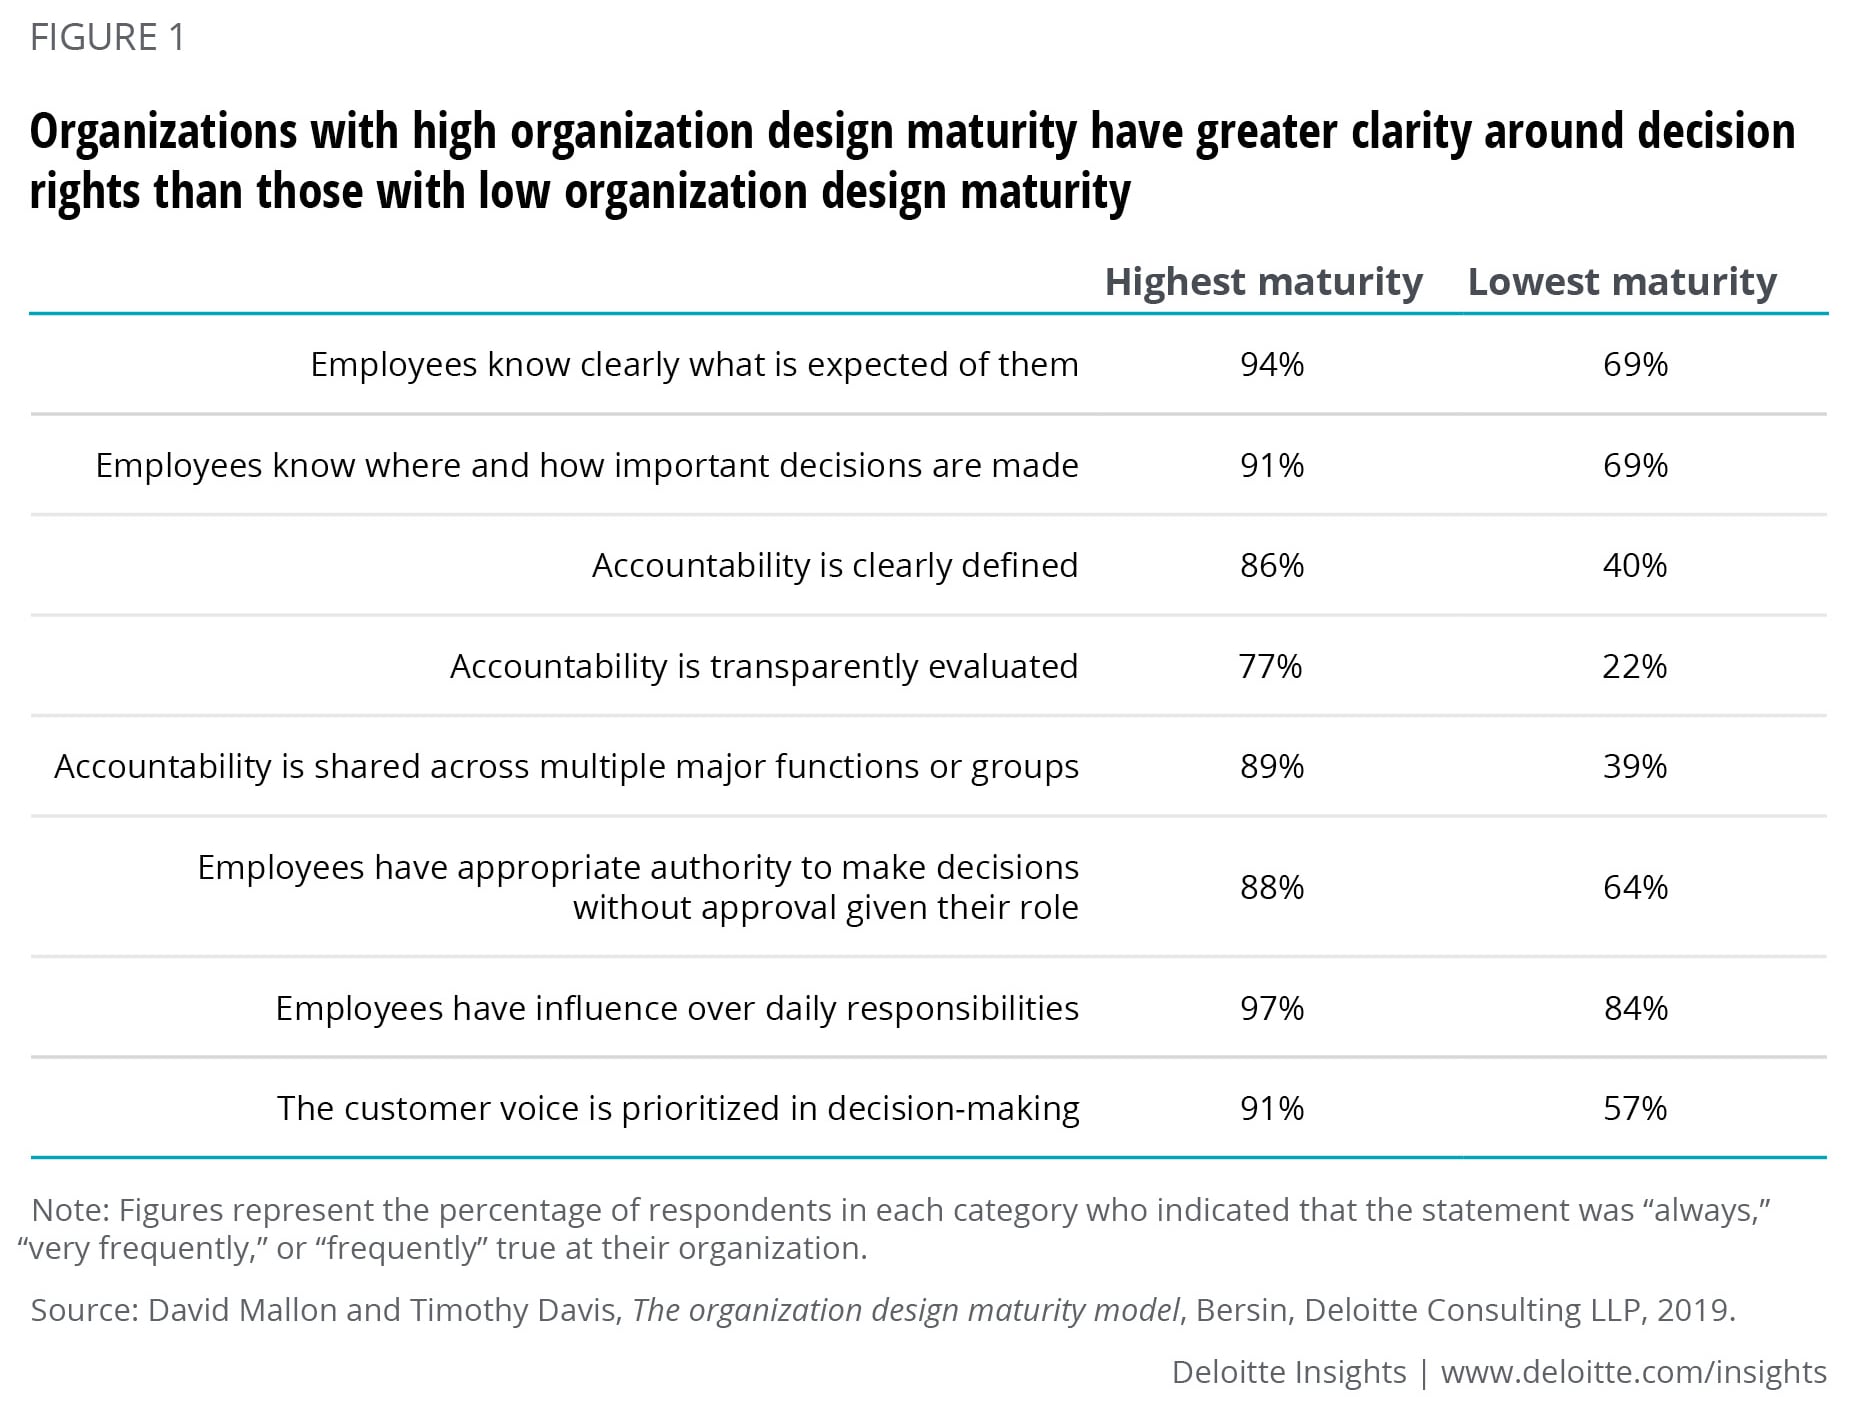 Organizations with high organization design maturity have greater clarity around decision rights than those with low organization design maturity